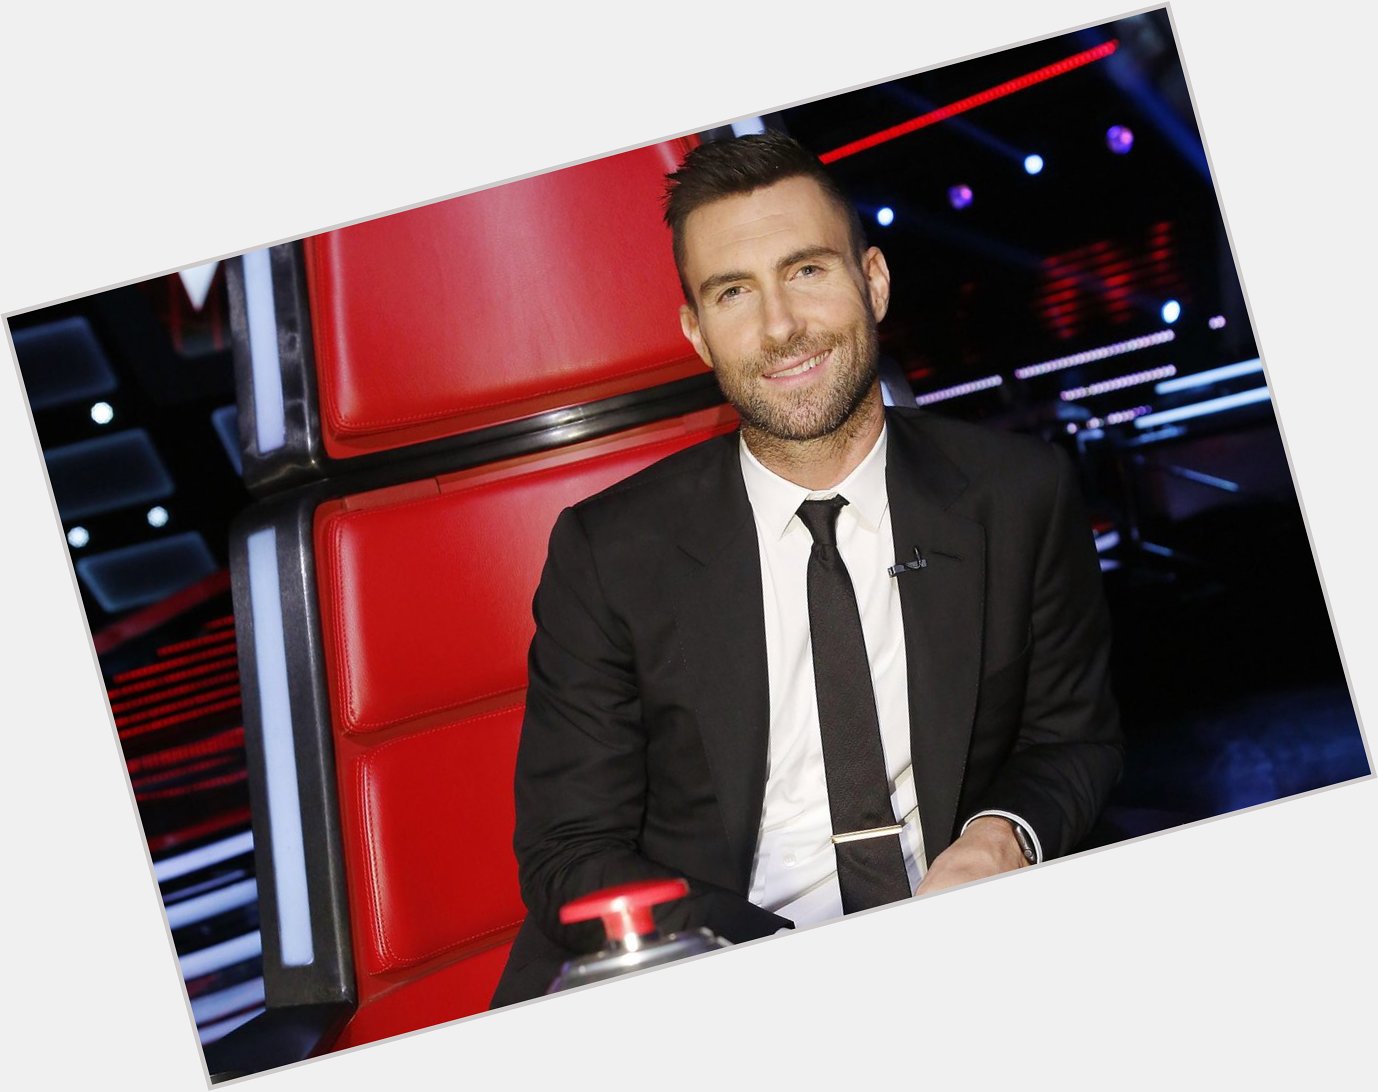 Happy 39th Birthday to Adam Levine! One of the coaches on The Voice. 